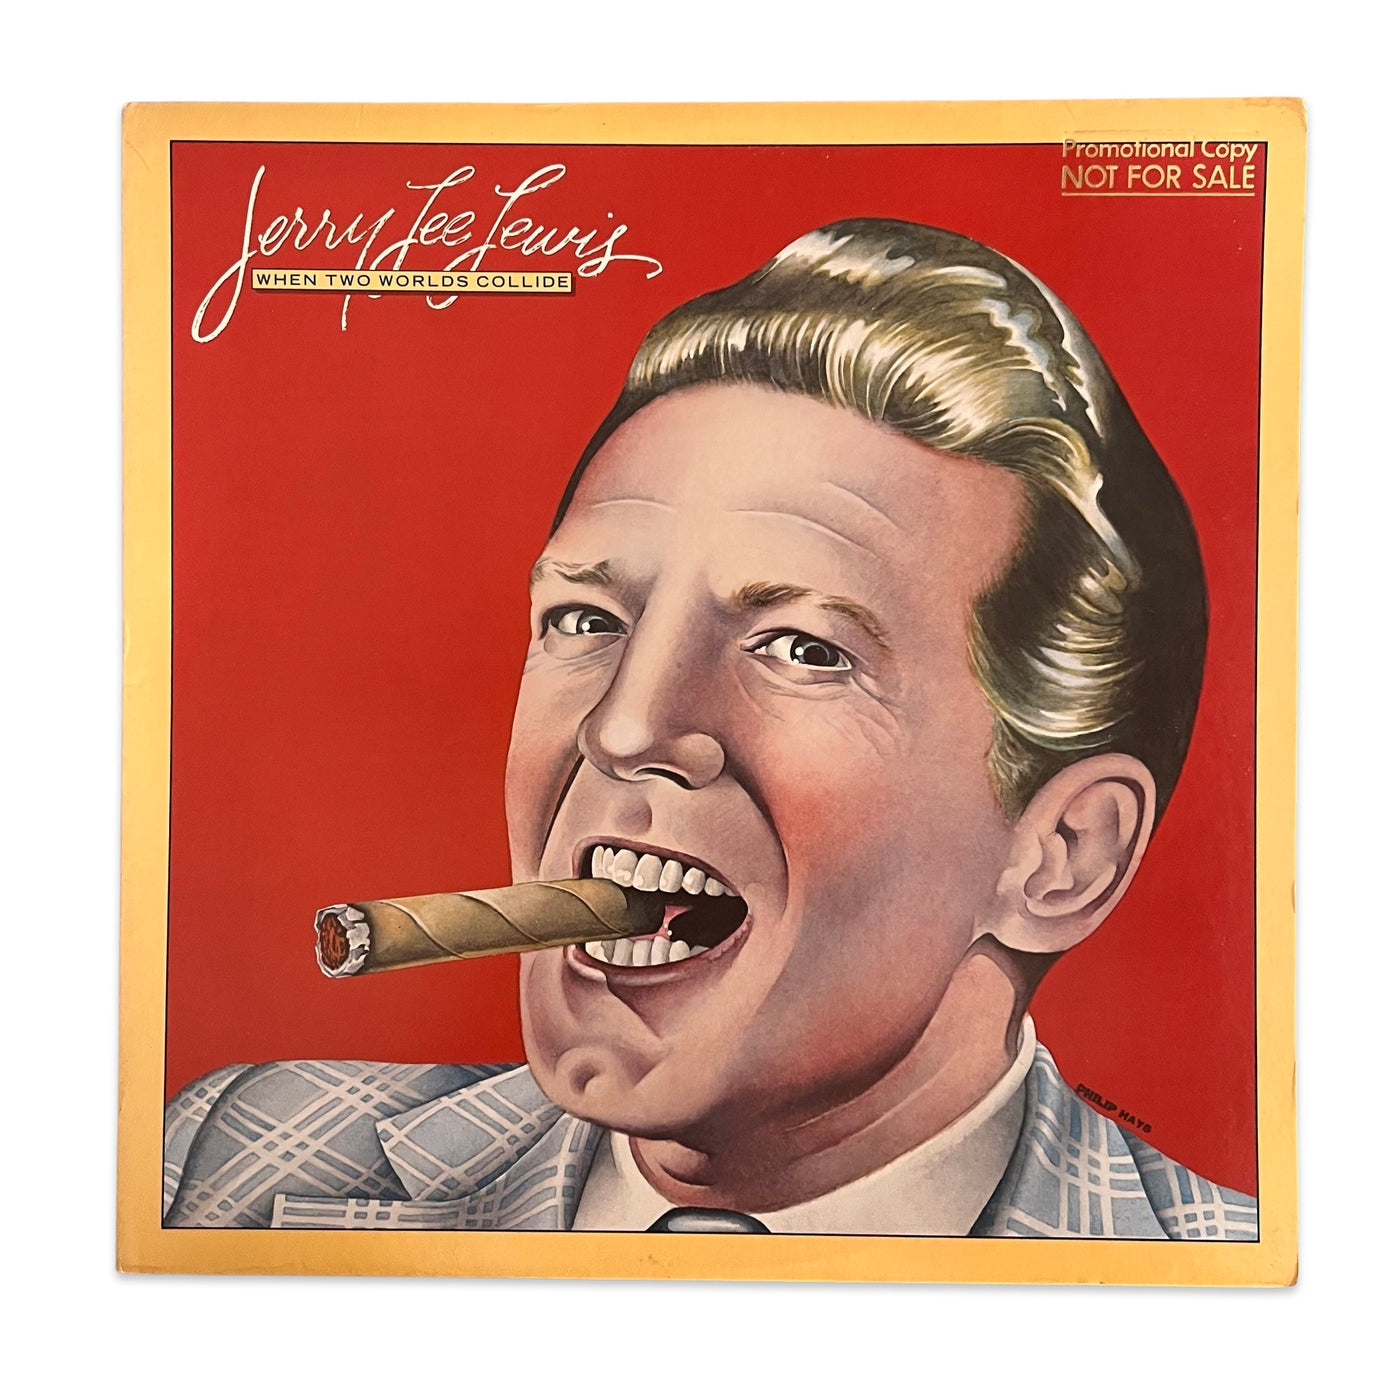 Jerry Lee Lewis – When Two Worlds Collide